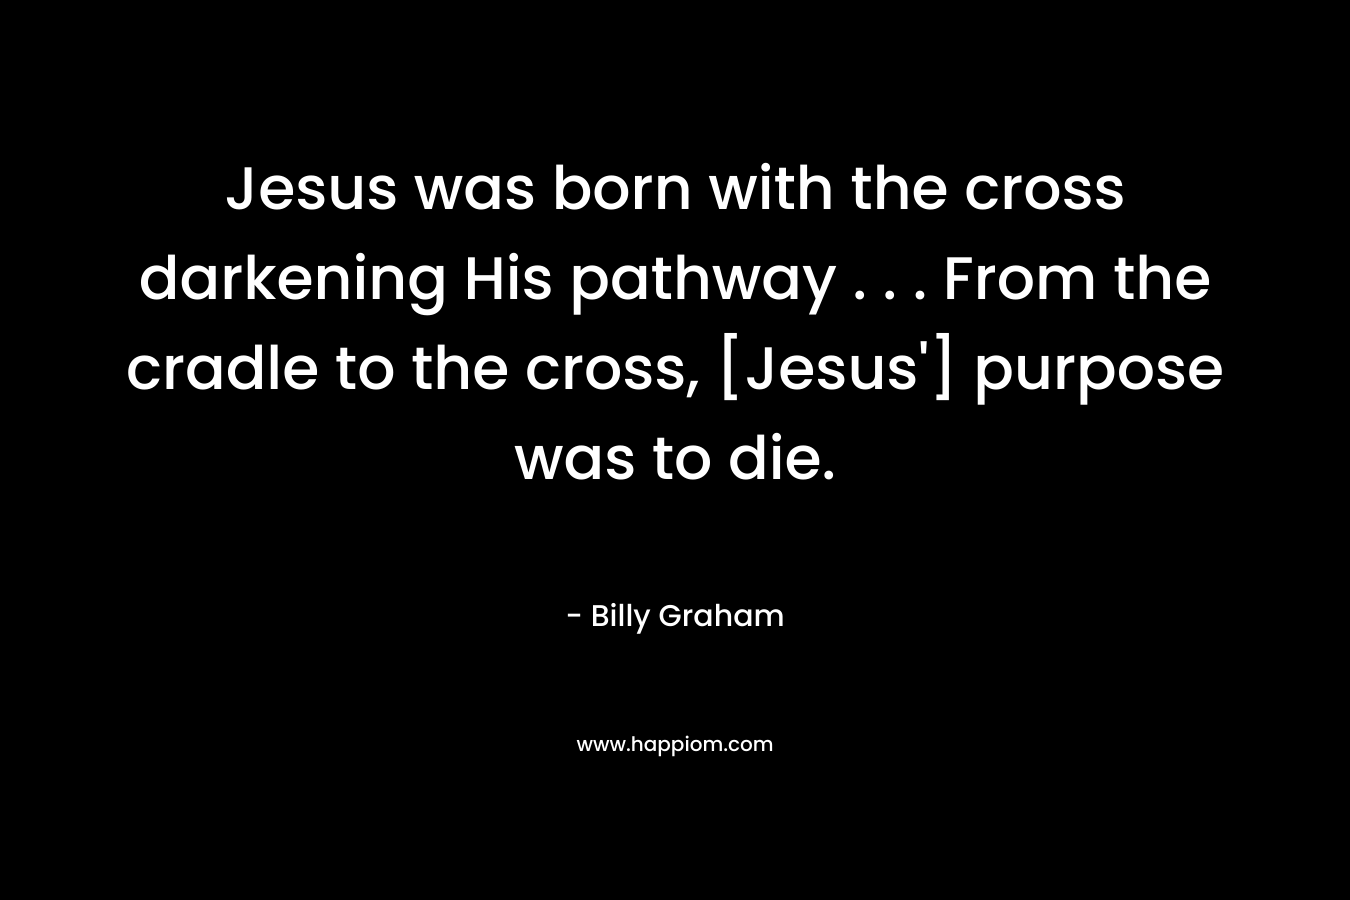 Jesus was born with the cross darkening His pathway . . . From the cradle to the cross, [Jesus'] purpose was to die.